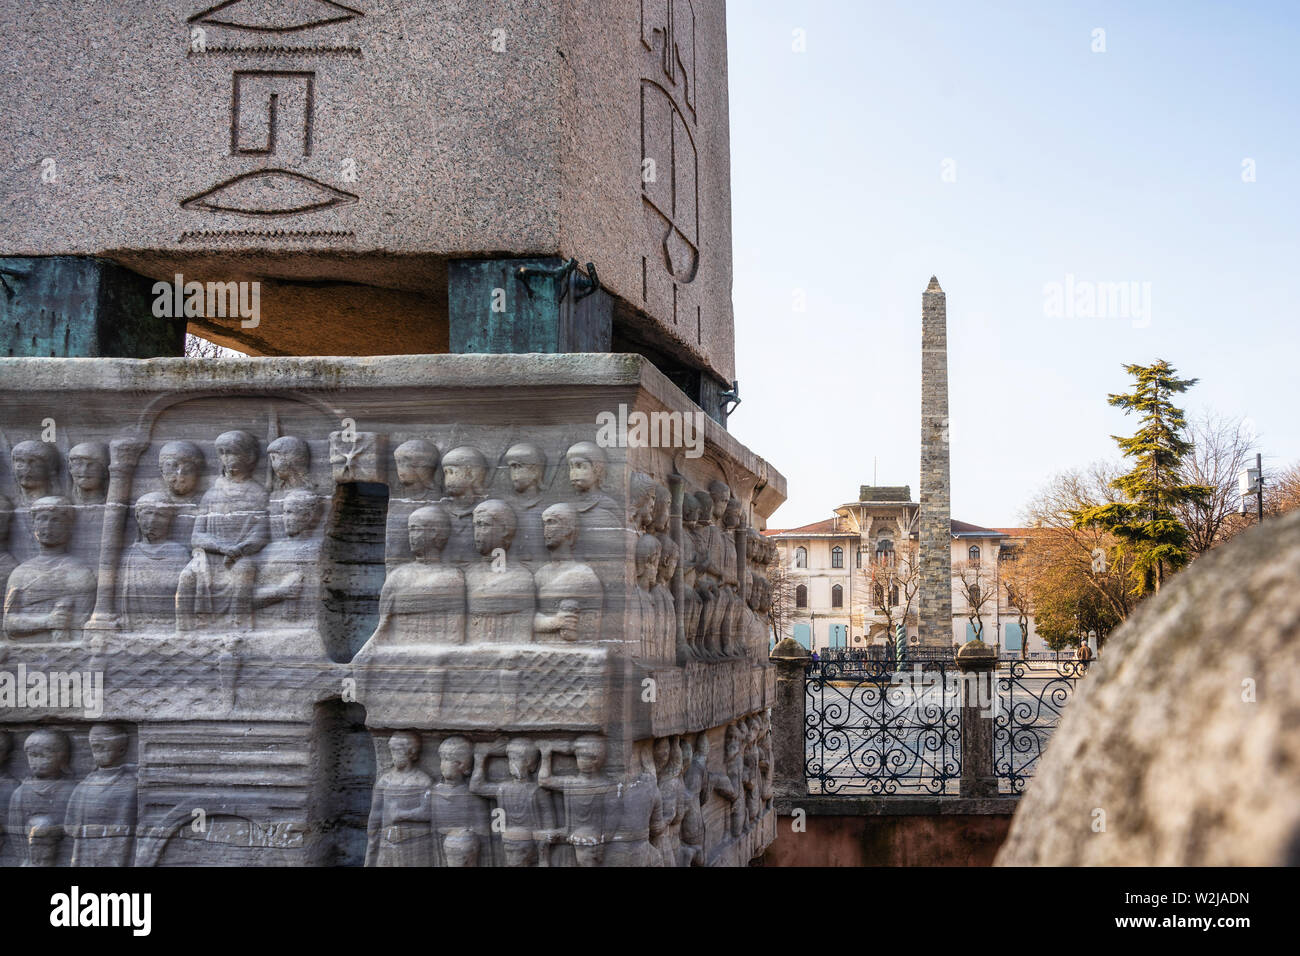 Details of the bas relief of the pedestal of Theodosius Obelisk and Walled Obelisk on background on Hippodrome of Constantinople in Istanbul, Turkey Stock Photo